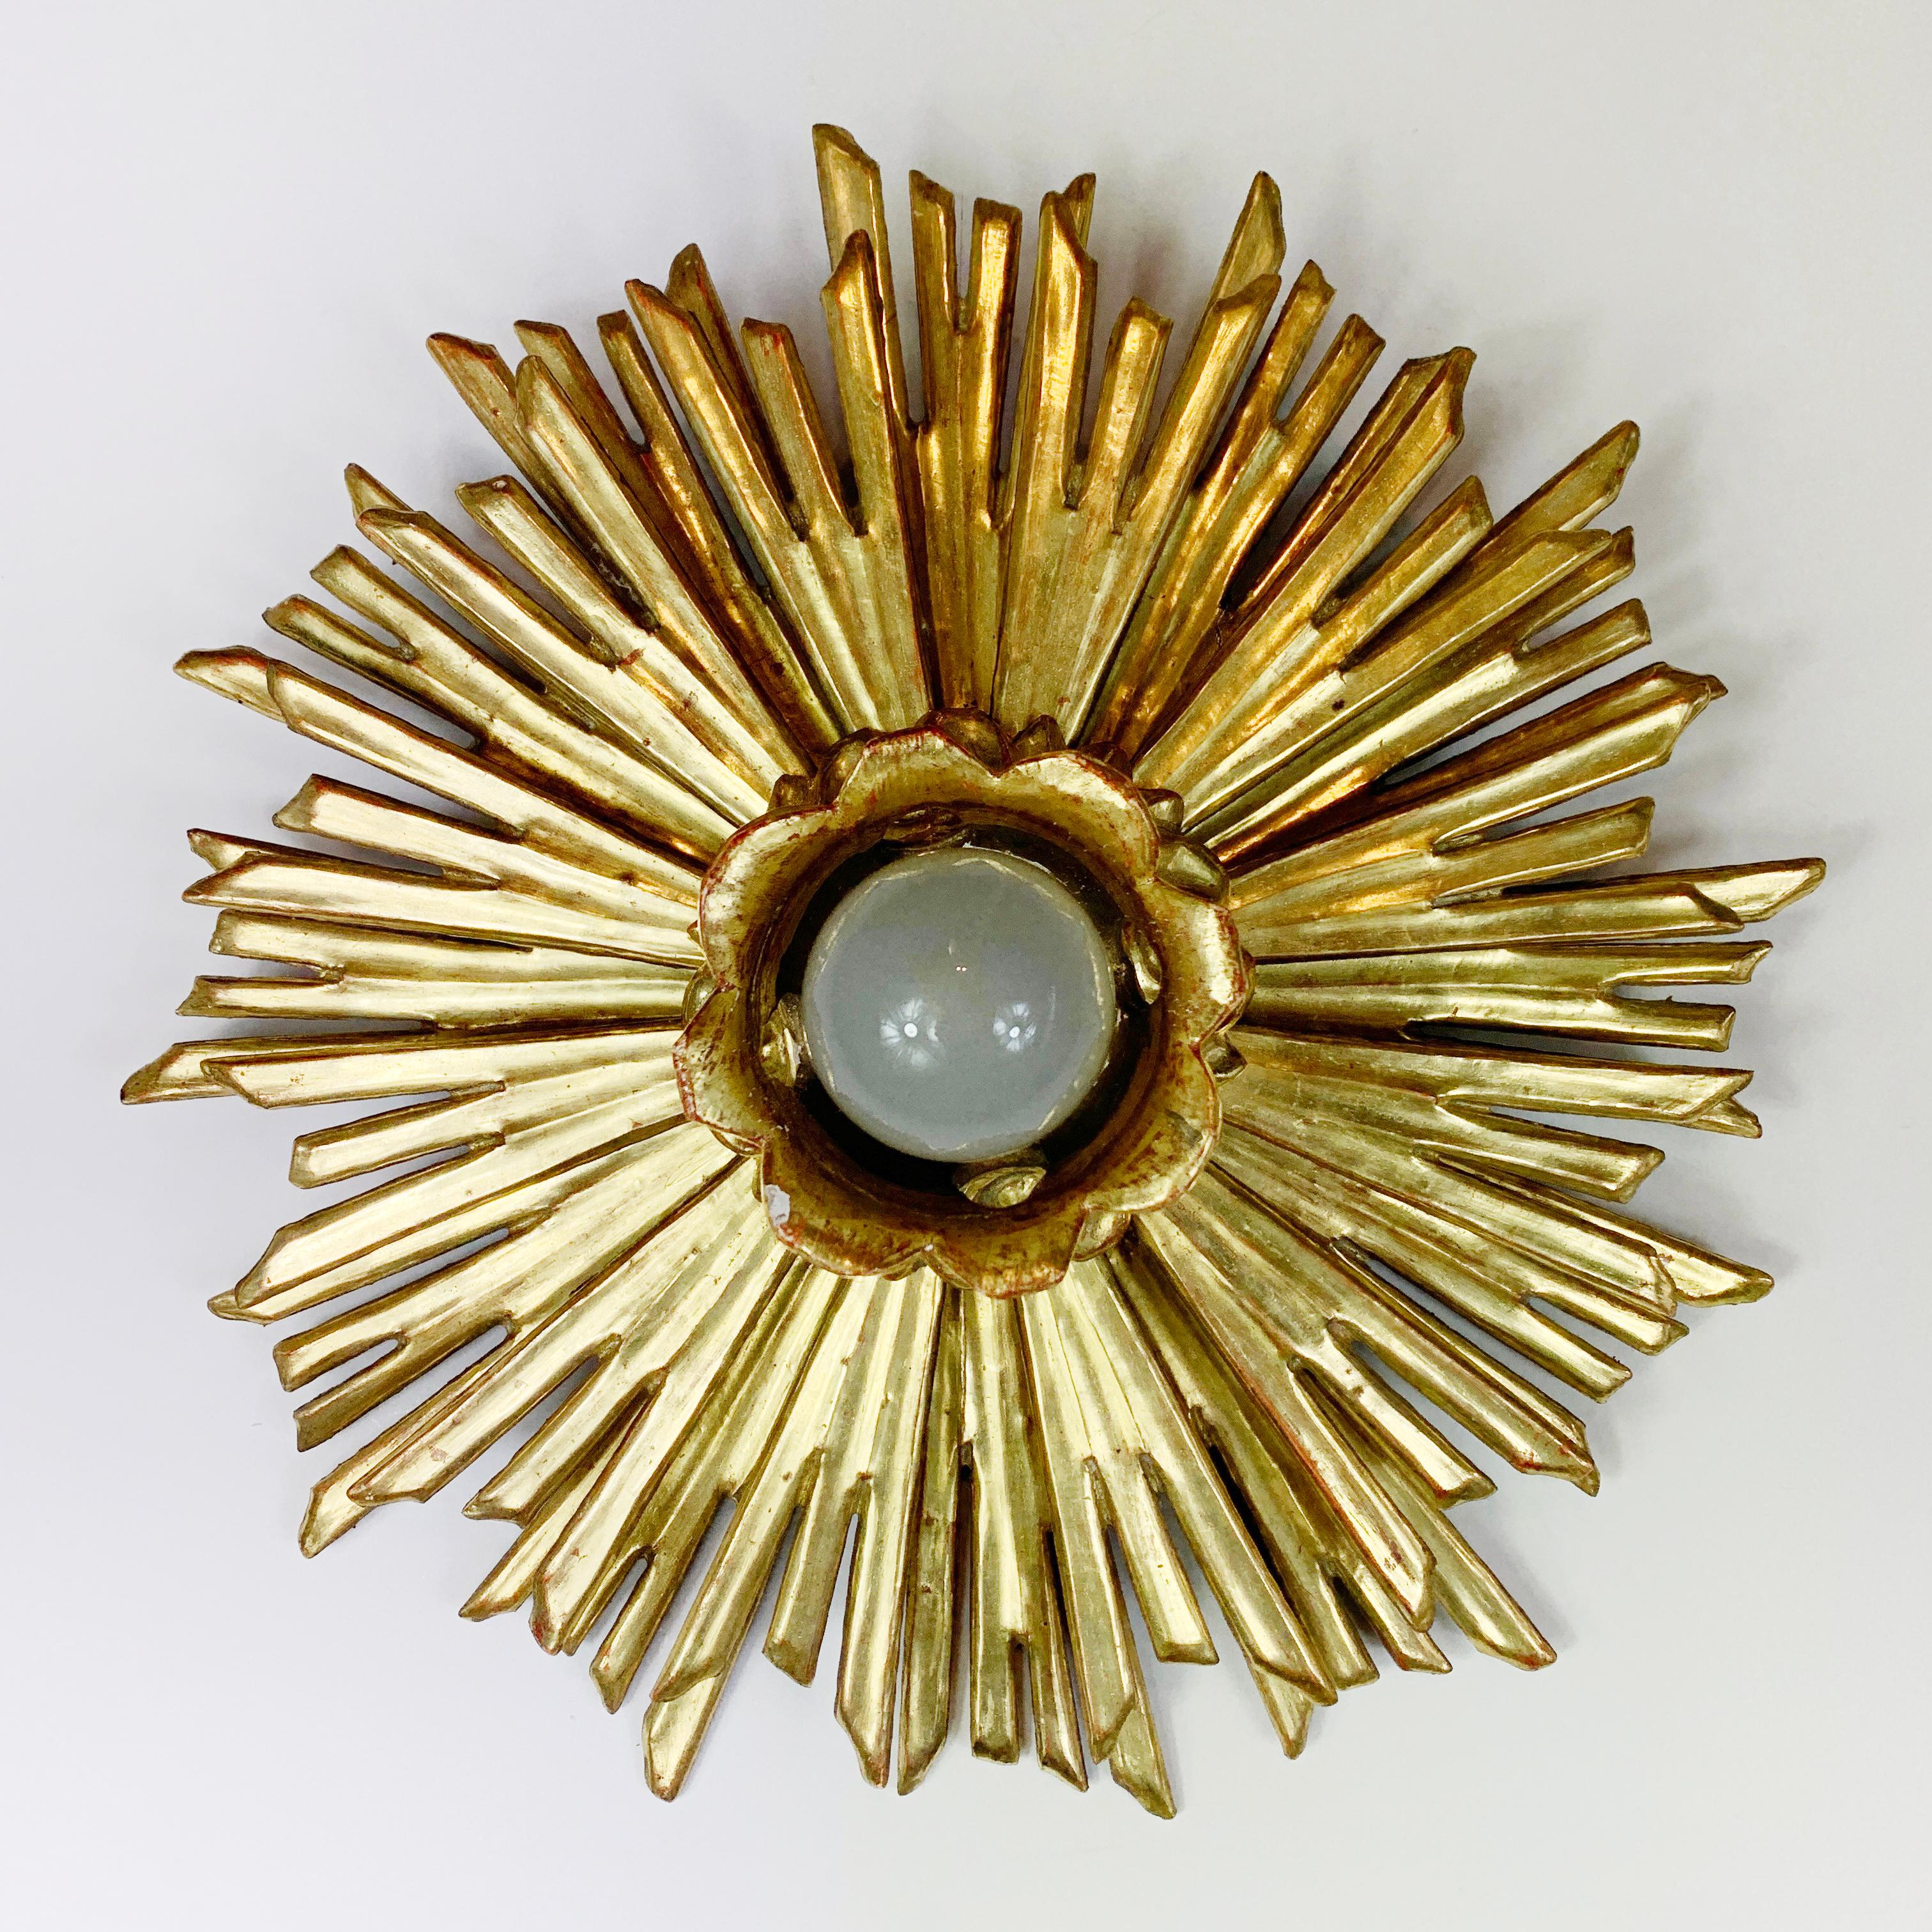 Fabulous 1930's water gilded sunburst flush mount. Carved wooden rays surround the single lamp holder to the centre, originally from a church in Germany this piece is in absolutely glorious condition, the bright gold gilding is superb.

These